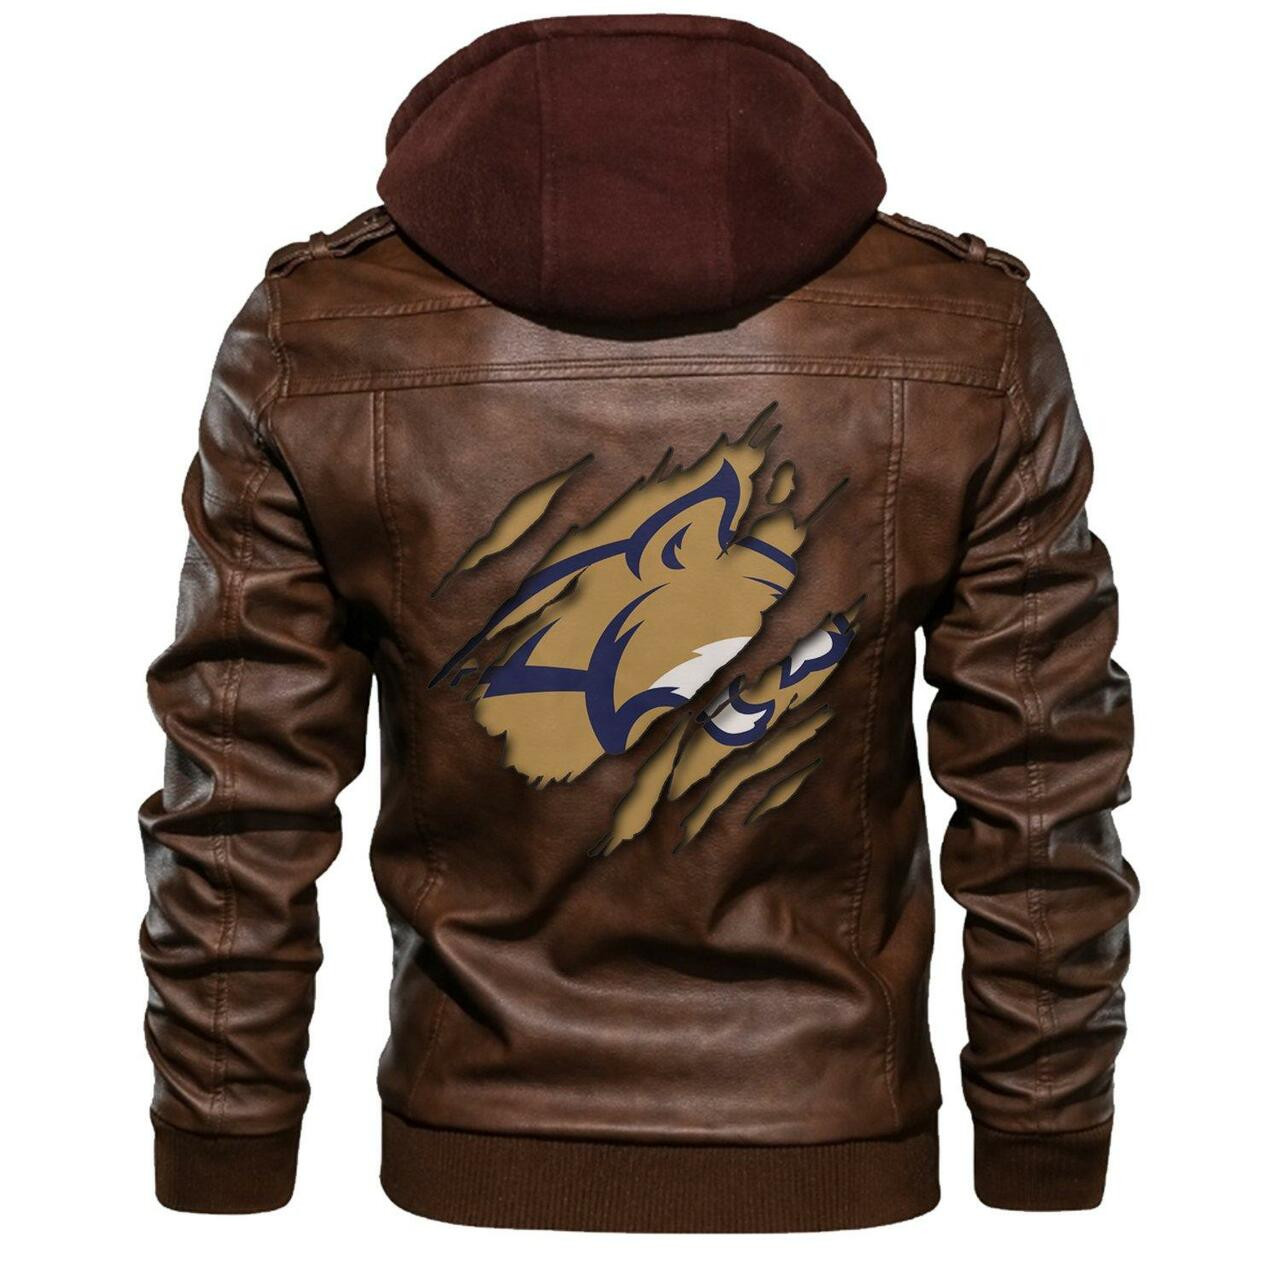 Top leather jacket can keep you warm on cooler days 136